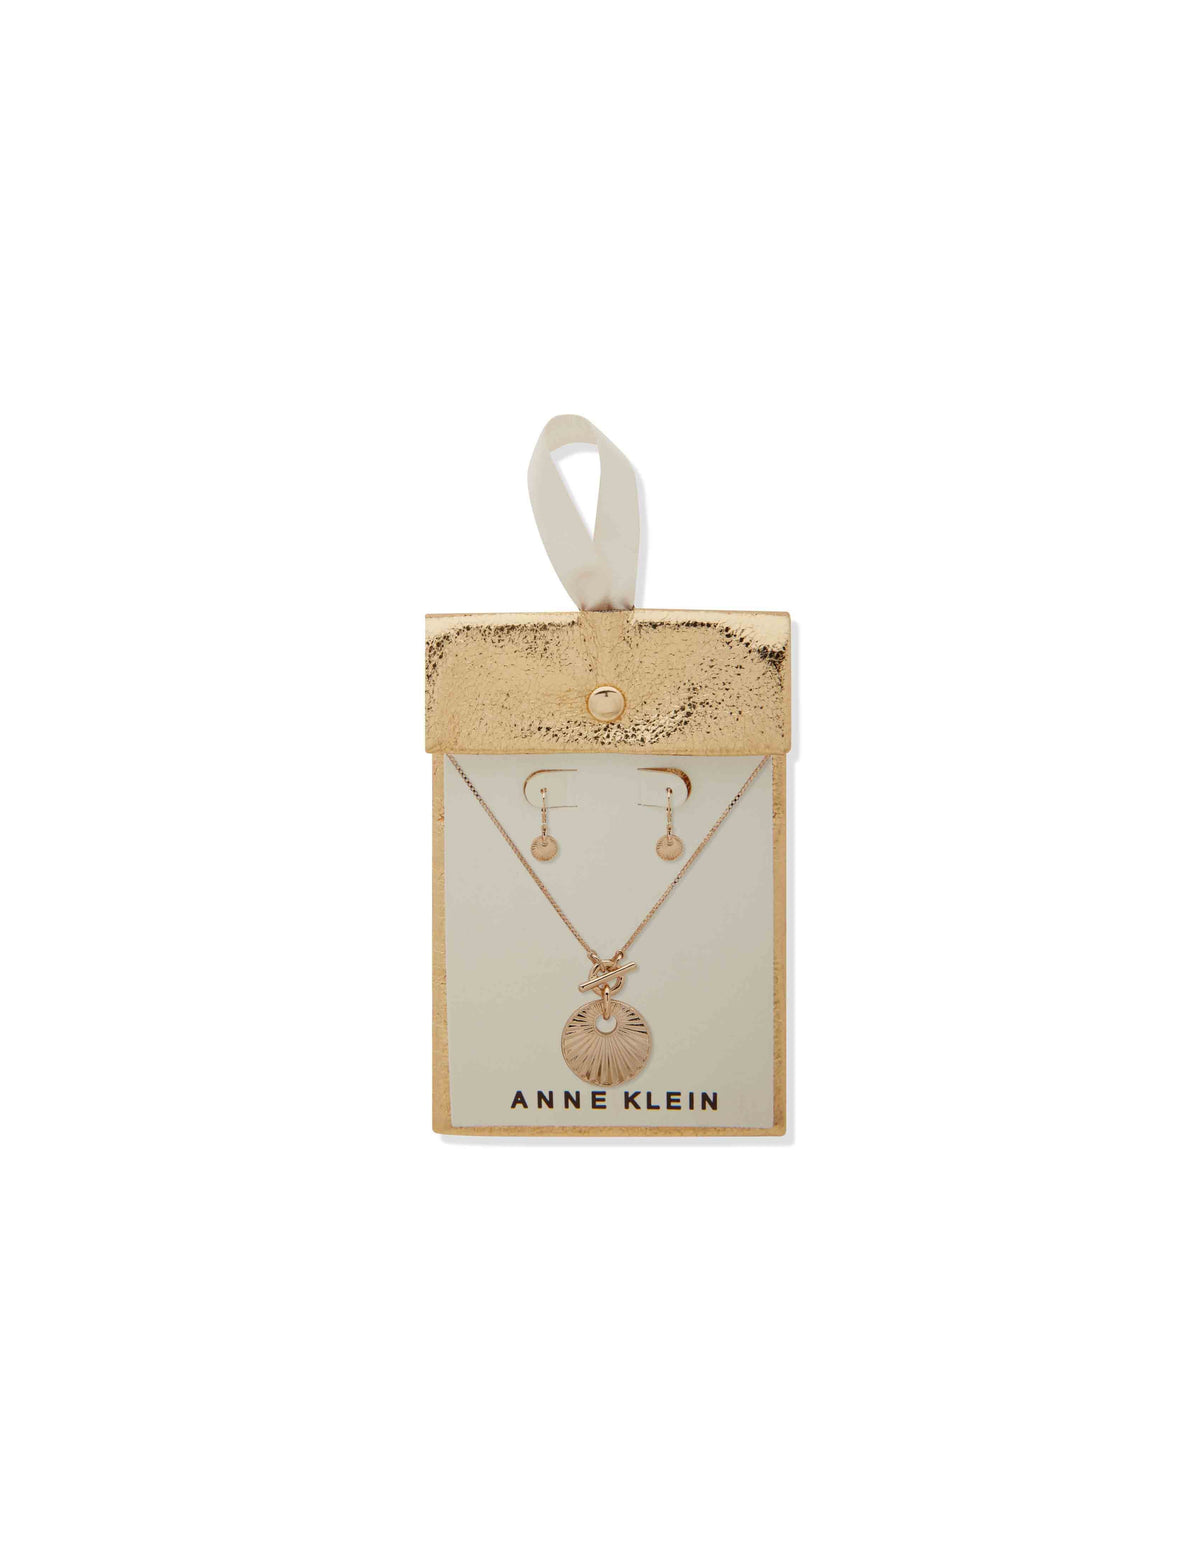 Anne Klein  Scalloped Pendant Necklace and Earring Set